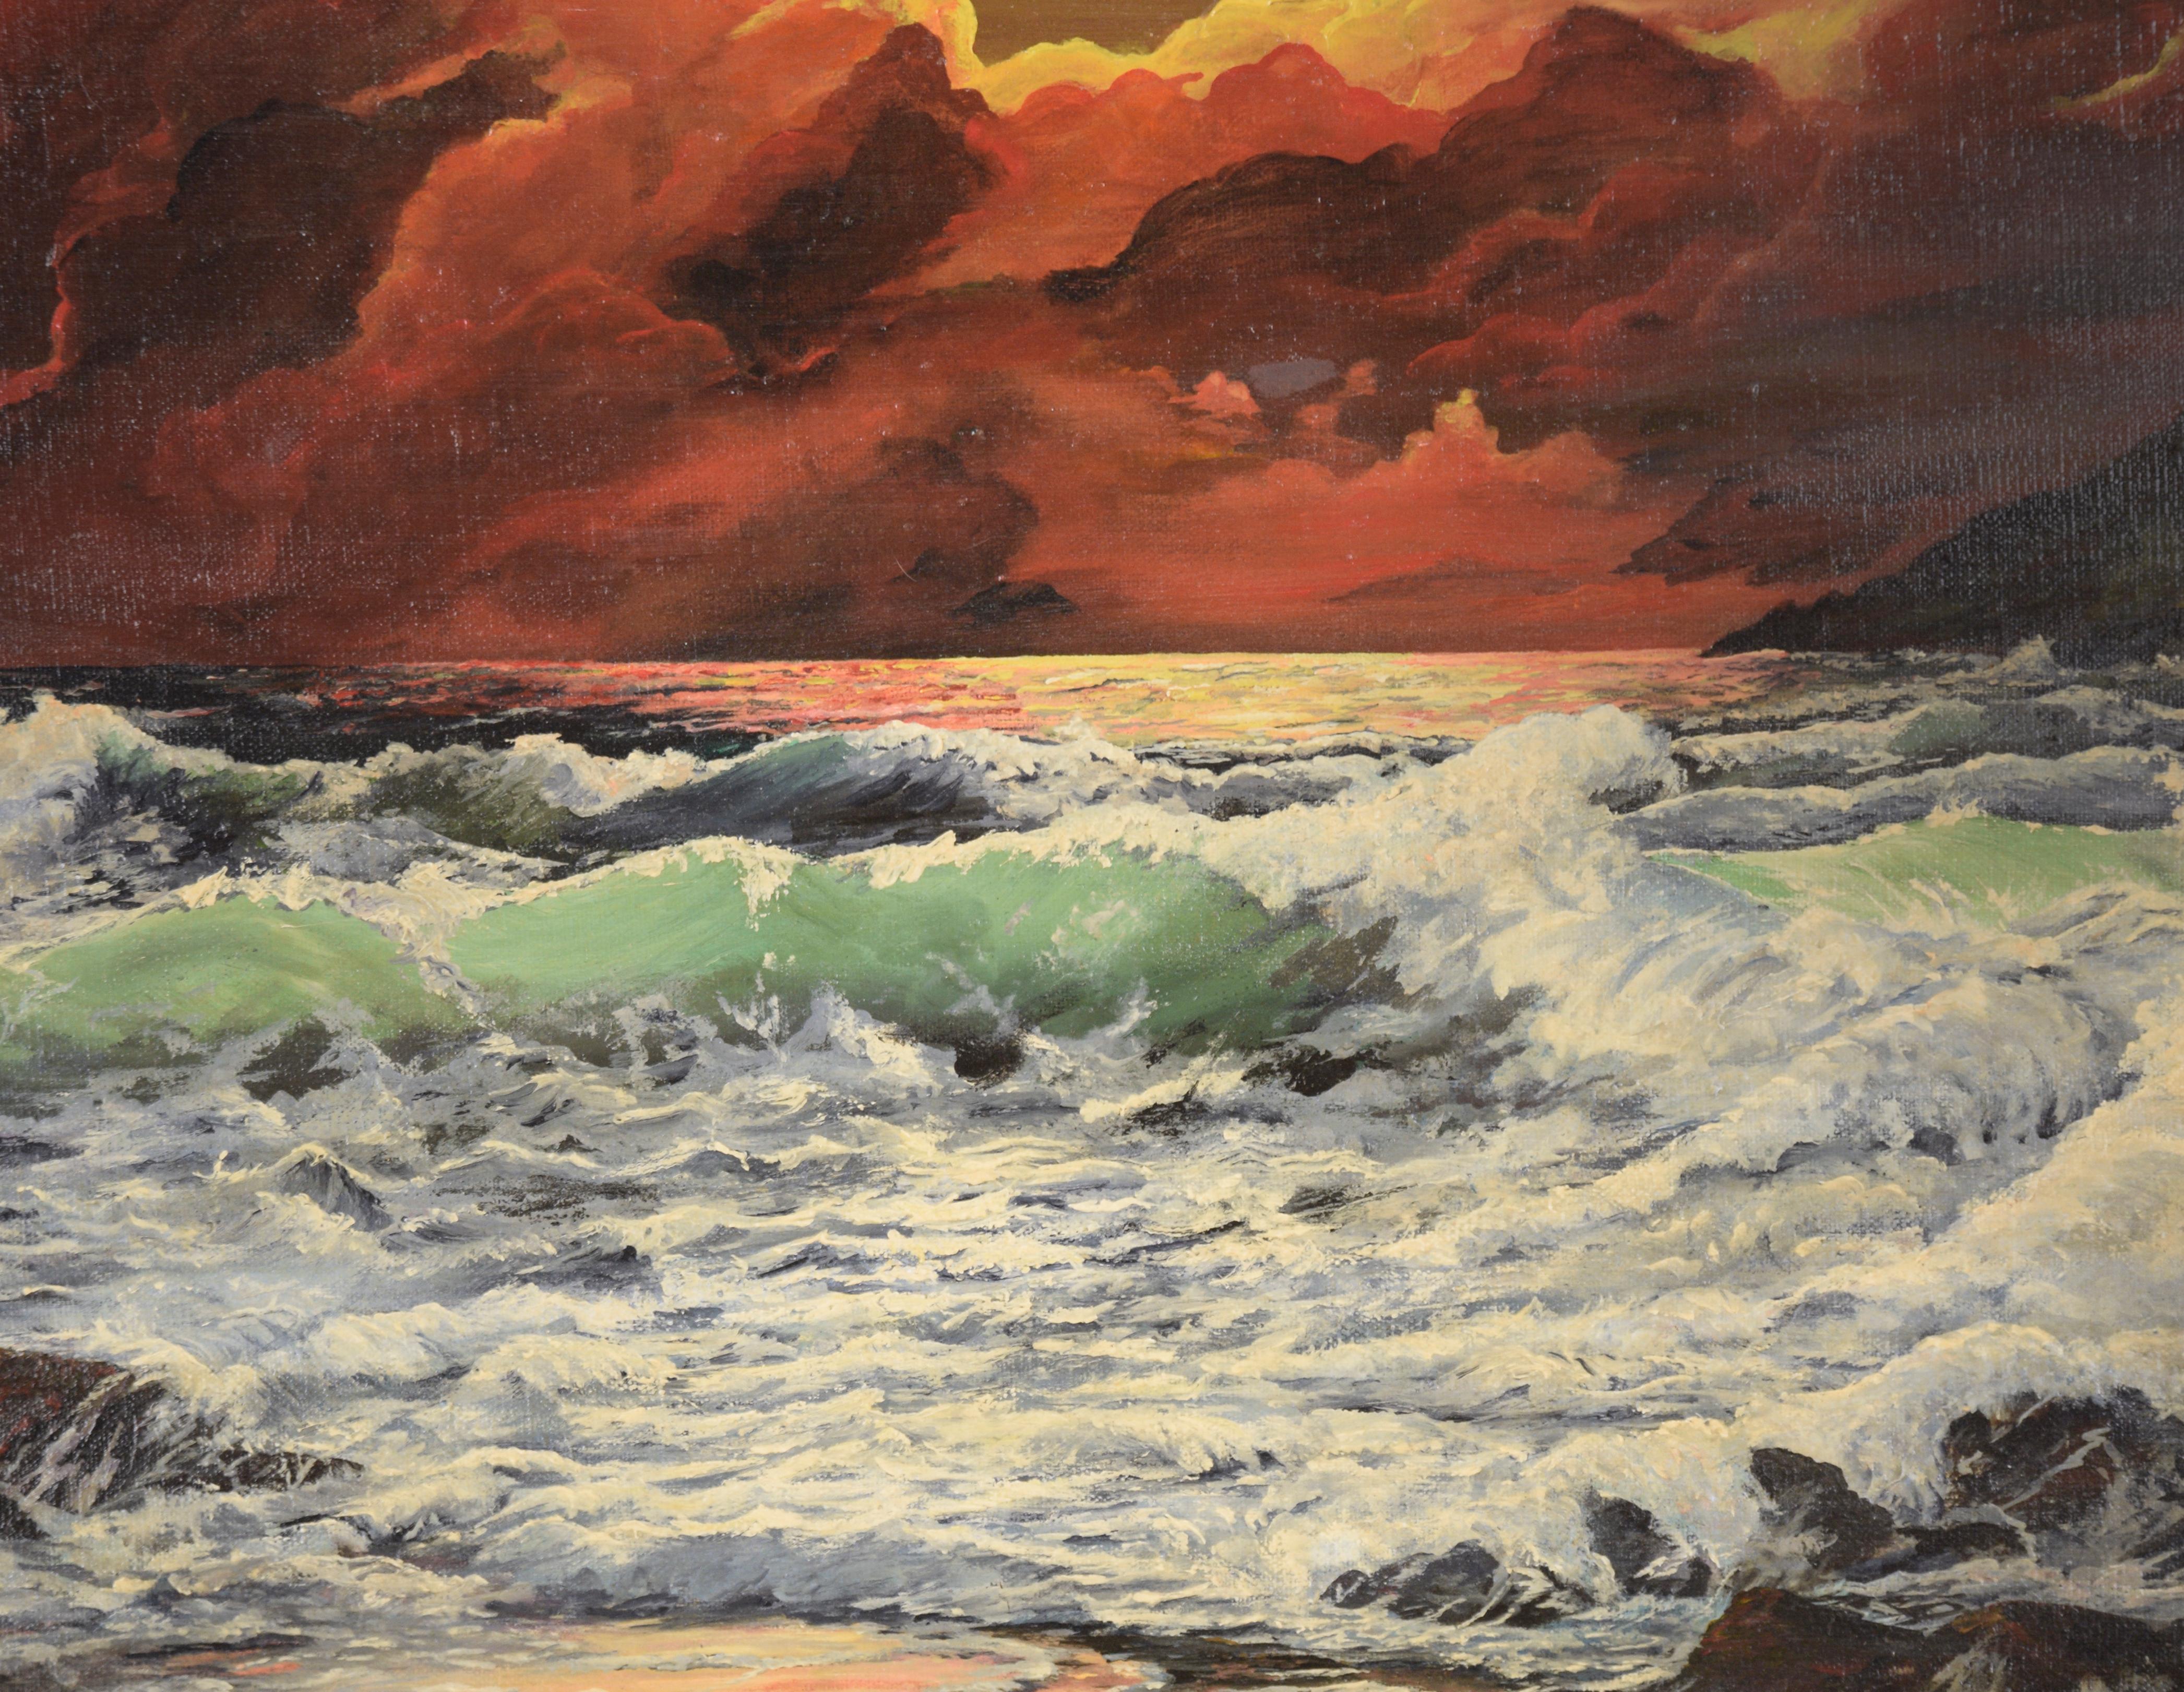 Red Skies Over the Sea - American Impressionist Painting by Unknown